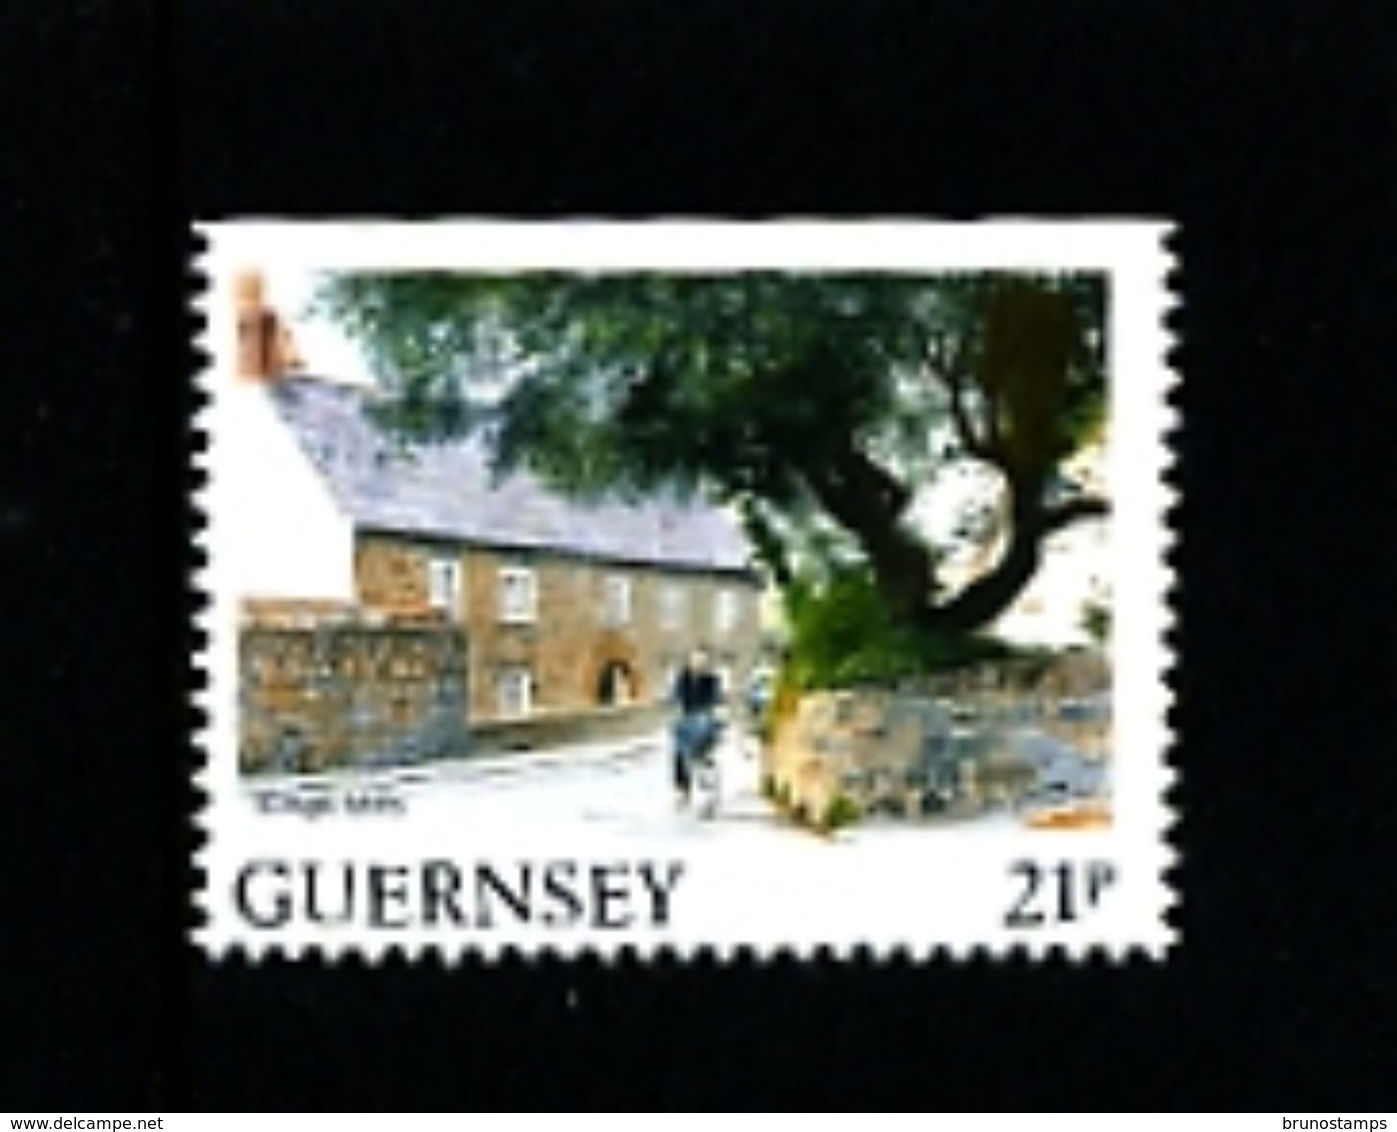 GUERNSEY - 1991  VIEWS  21p  EX BOOKLET  IMPERF  TOP  MINT NH - Guernesey